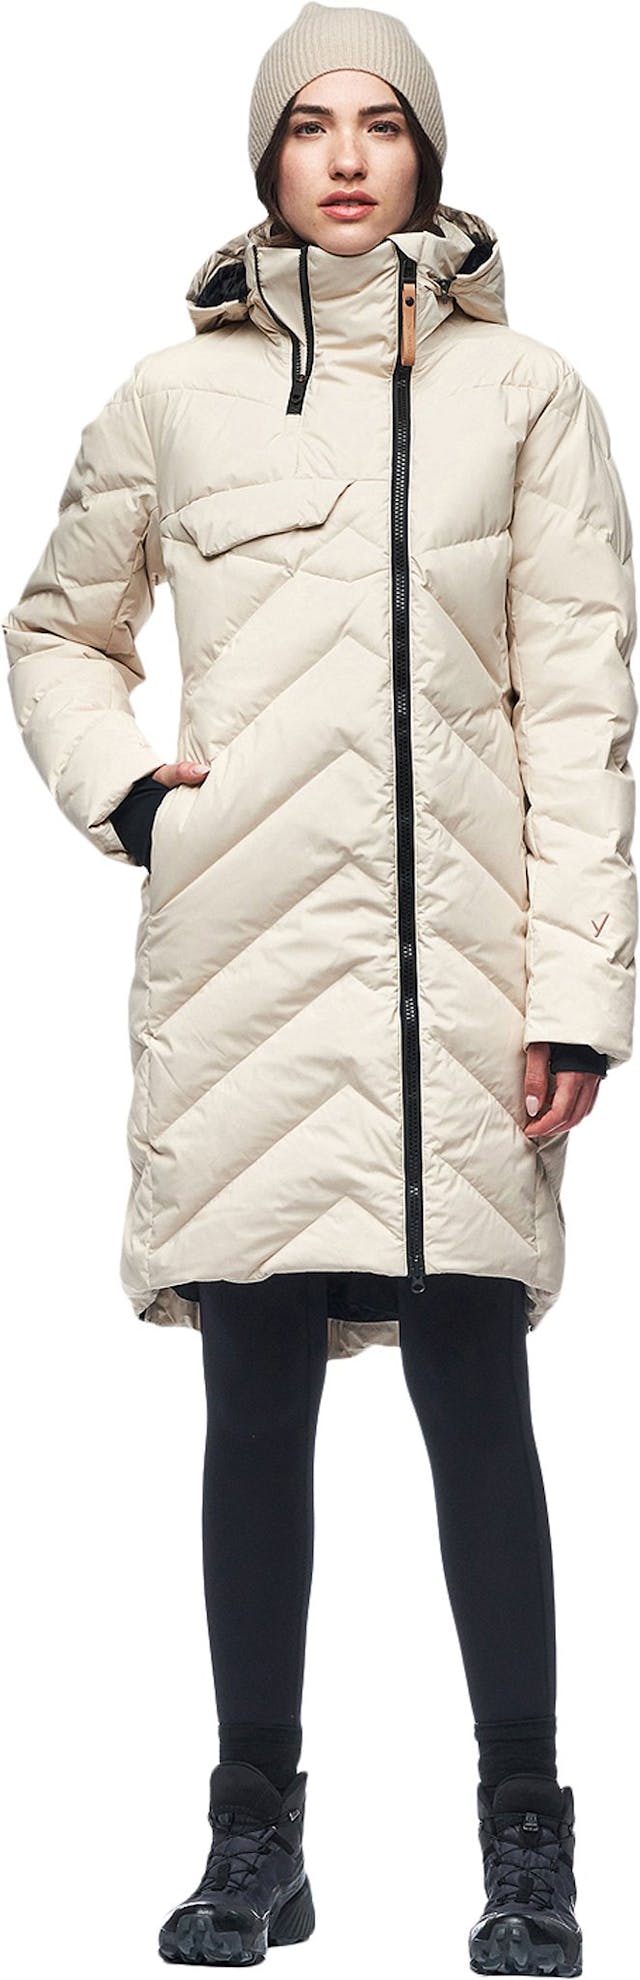 Product image for Leggero Quilted Down Blend Parka - Women's